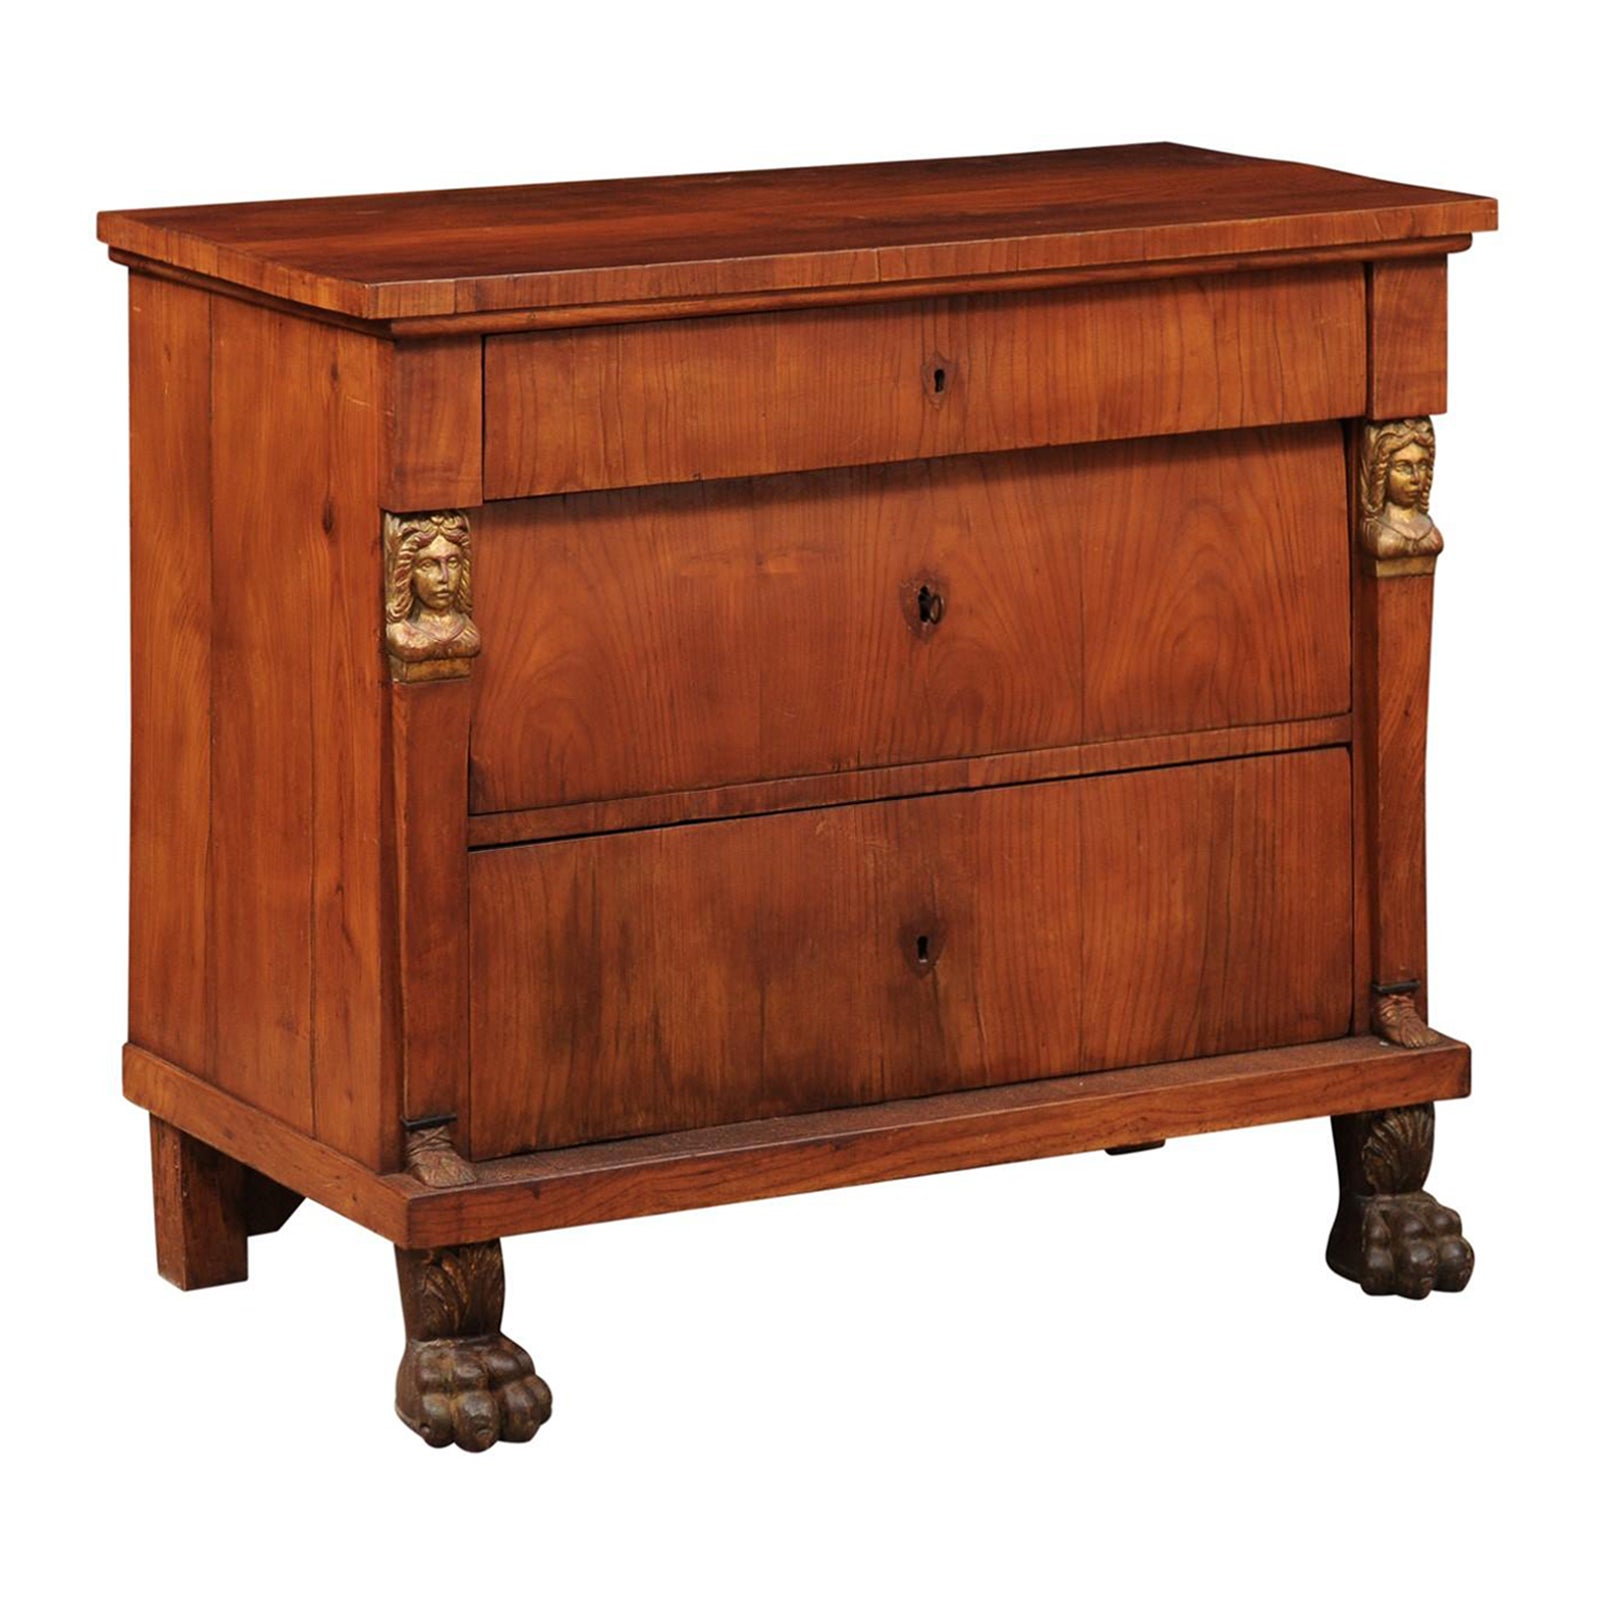 Early 19th C Italian Empire Petite Commode in Fruitwood with 3 Drawers For Sale